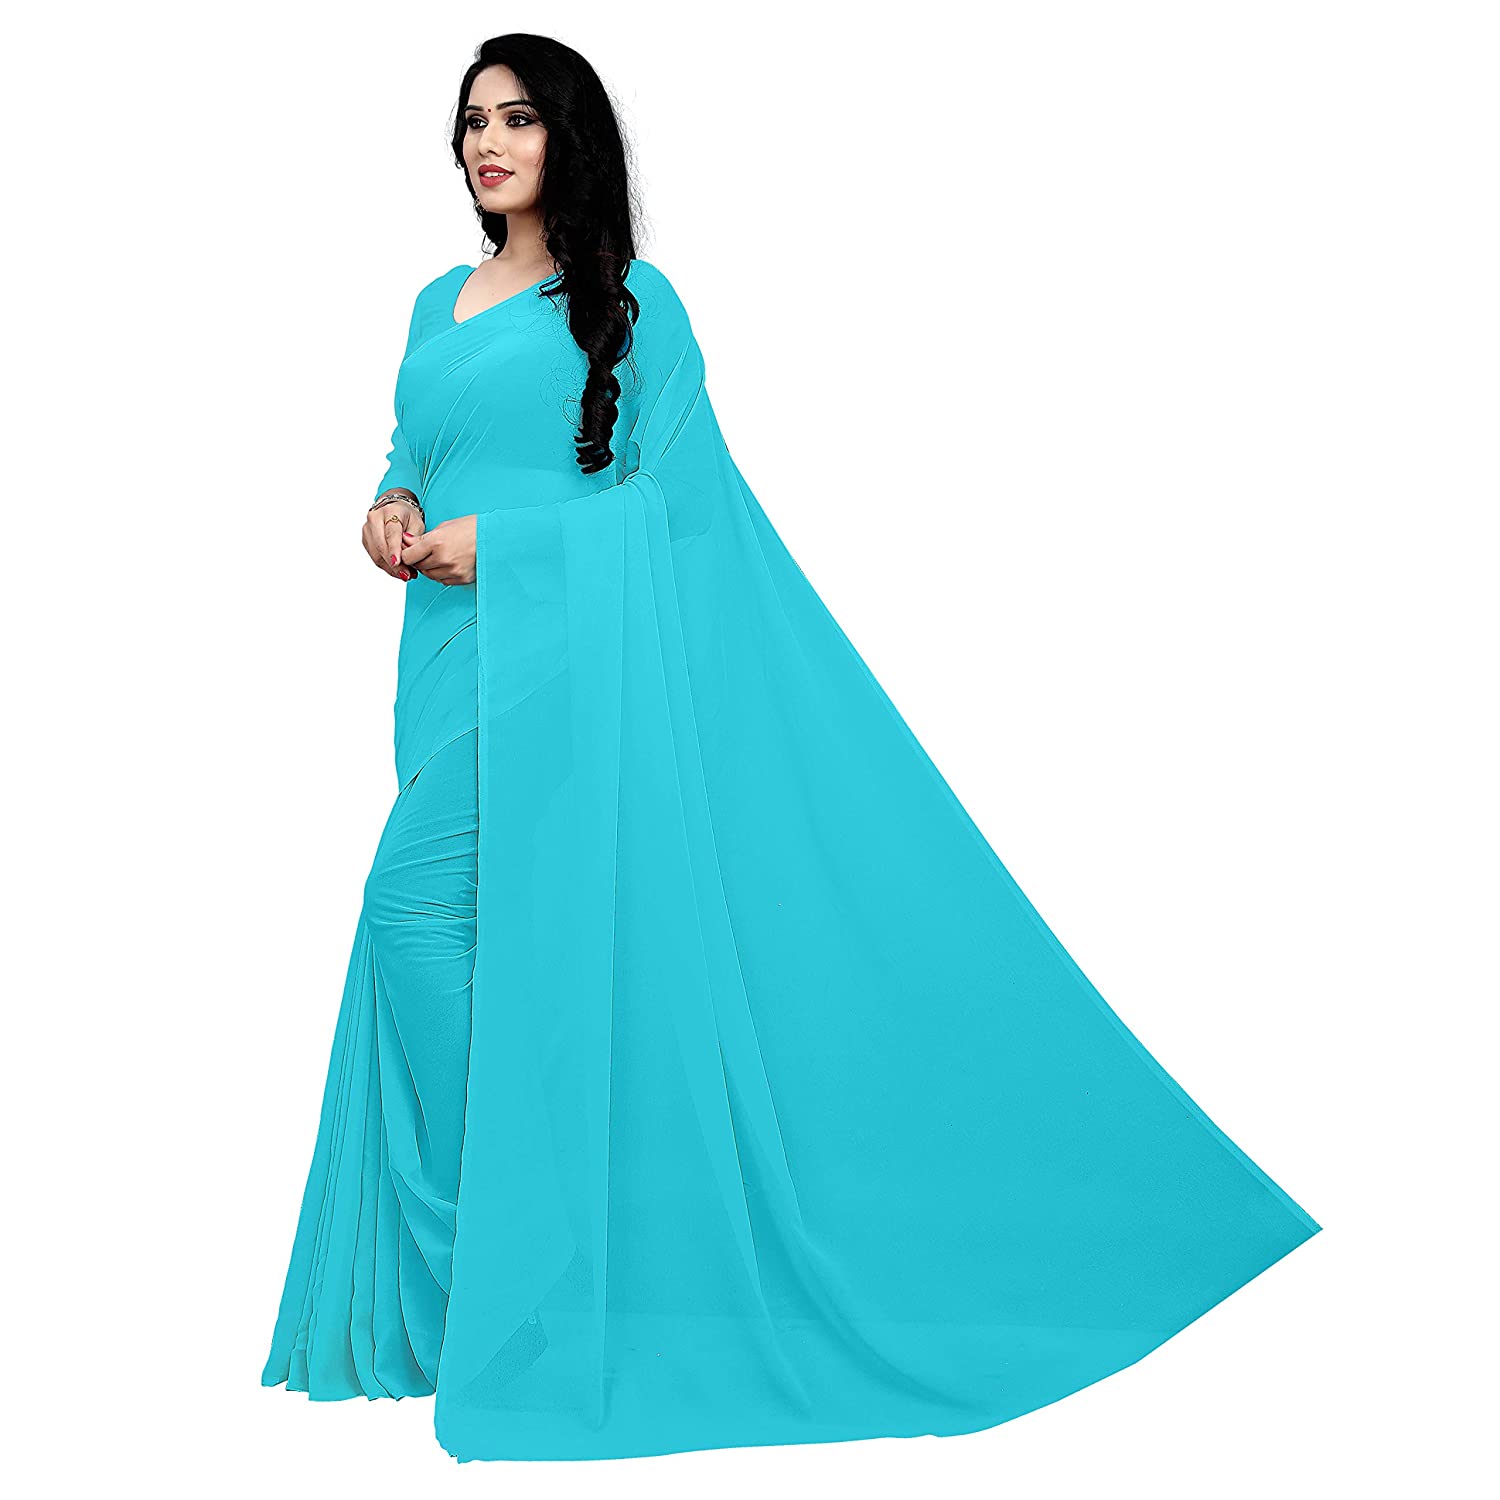 Women's Plain Woven Daily Wear  Formal Georgette Sari With Blouse Piece (Sky Blue) - NIMIDHYA